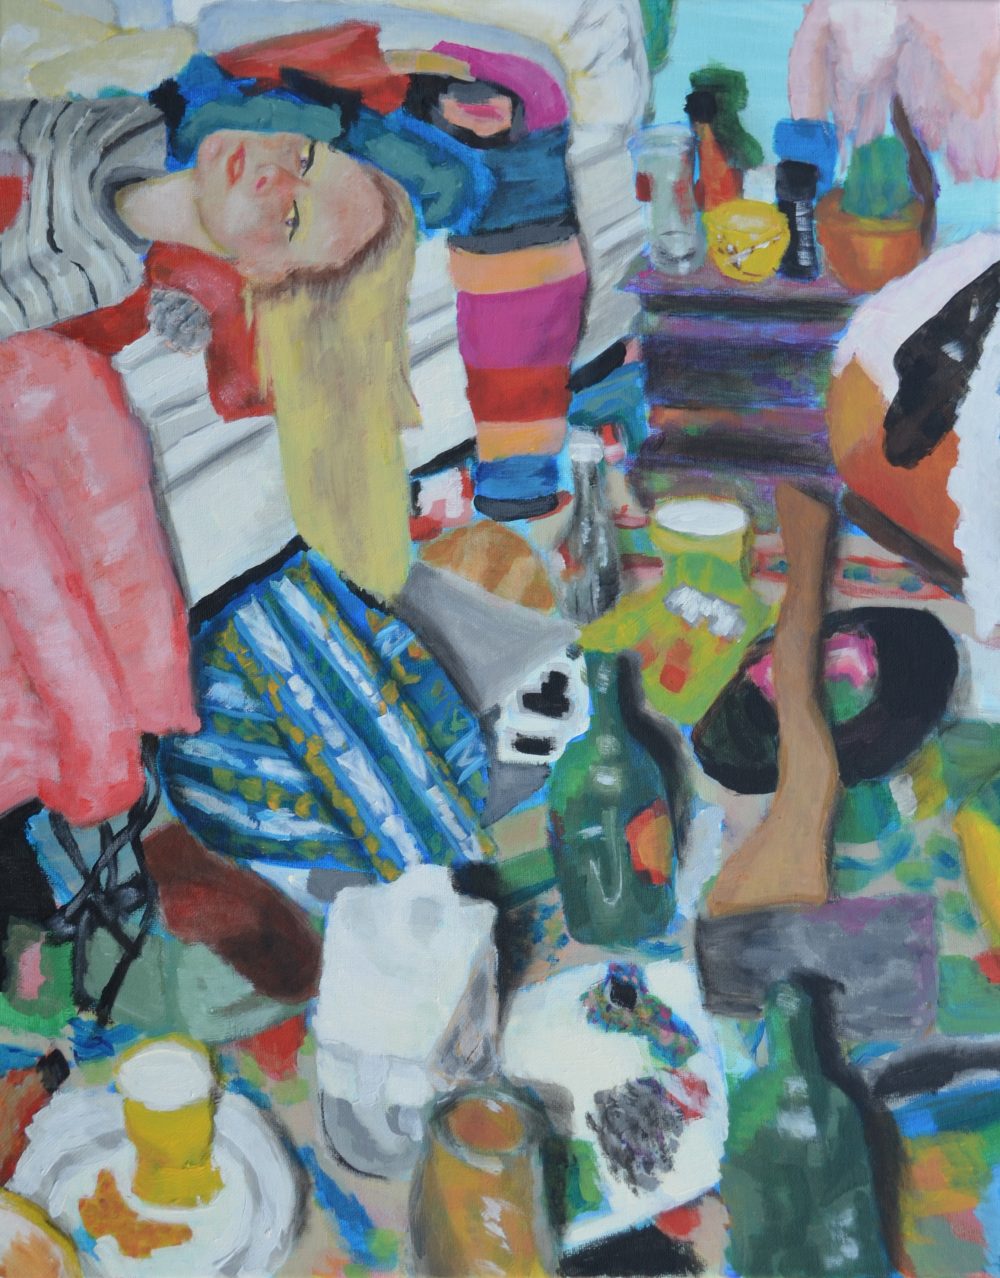 A painting of a woman's very messy room: the ground is littered with trash, bottles, and kitchen wear; the woman lays on her bed in the upper left corner looking at the viewer with a tired expression.